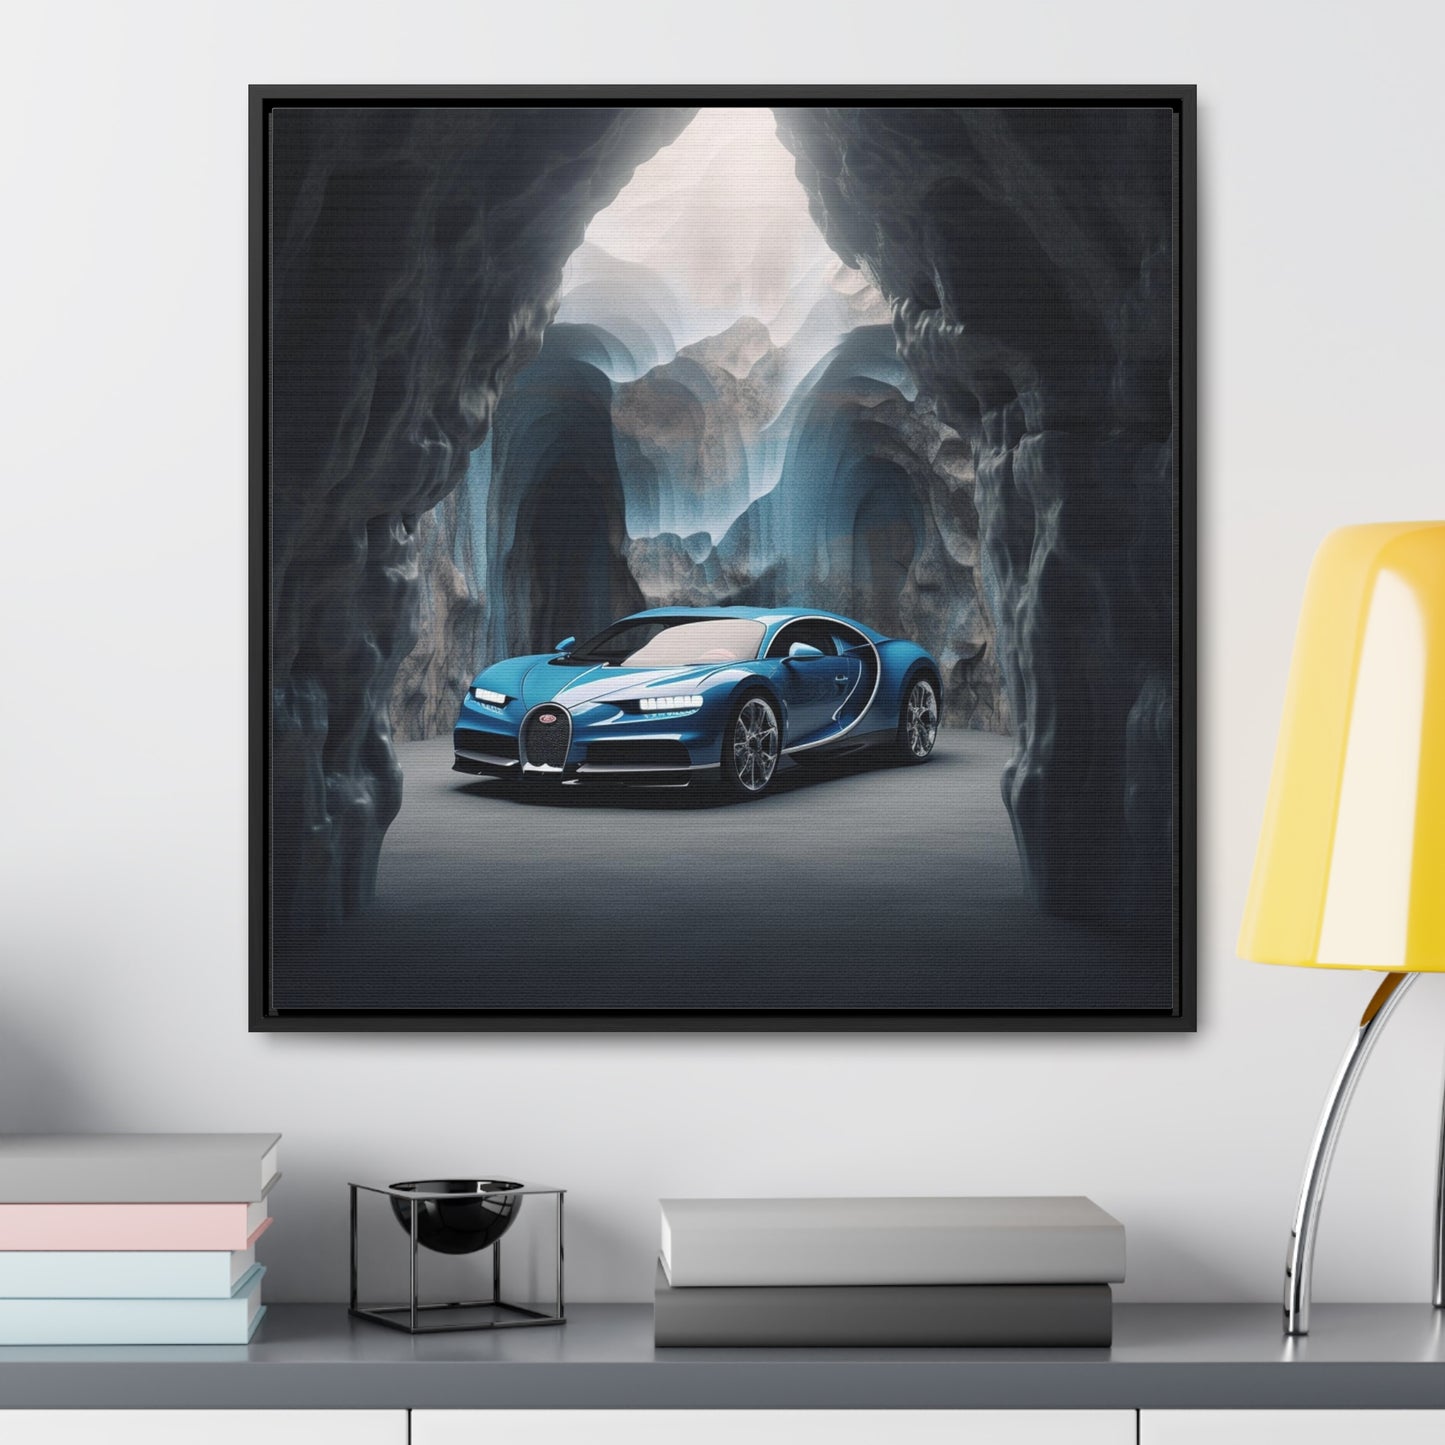 Gallery Canvas Wraps, Square Frame Bugatti Real Look 2